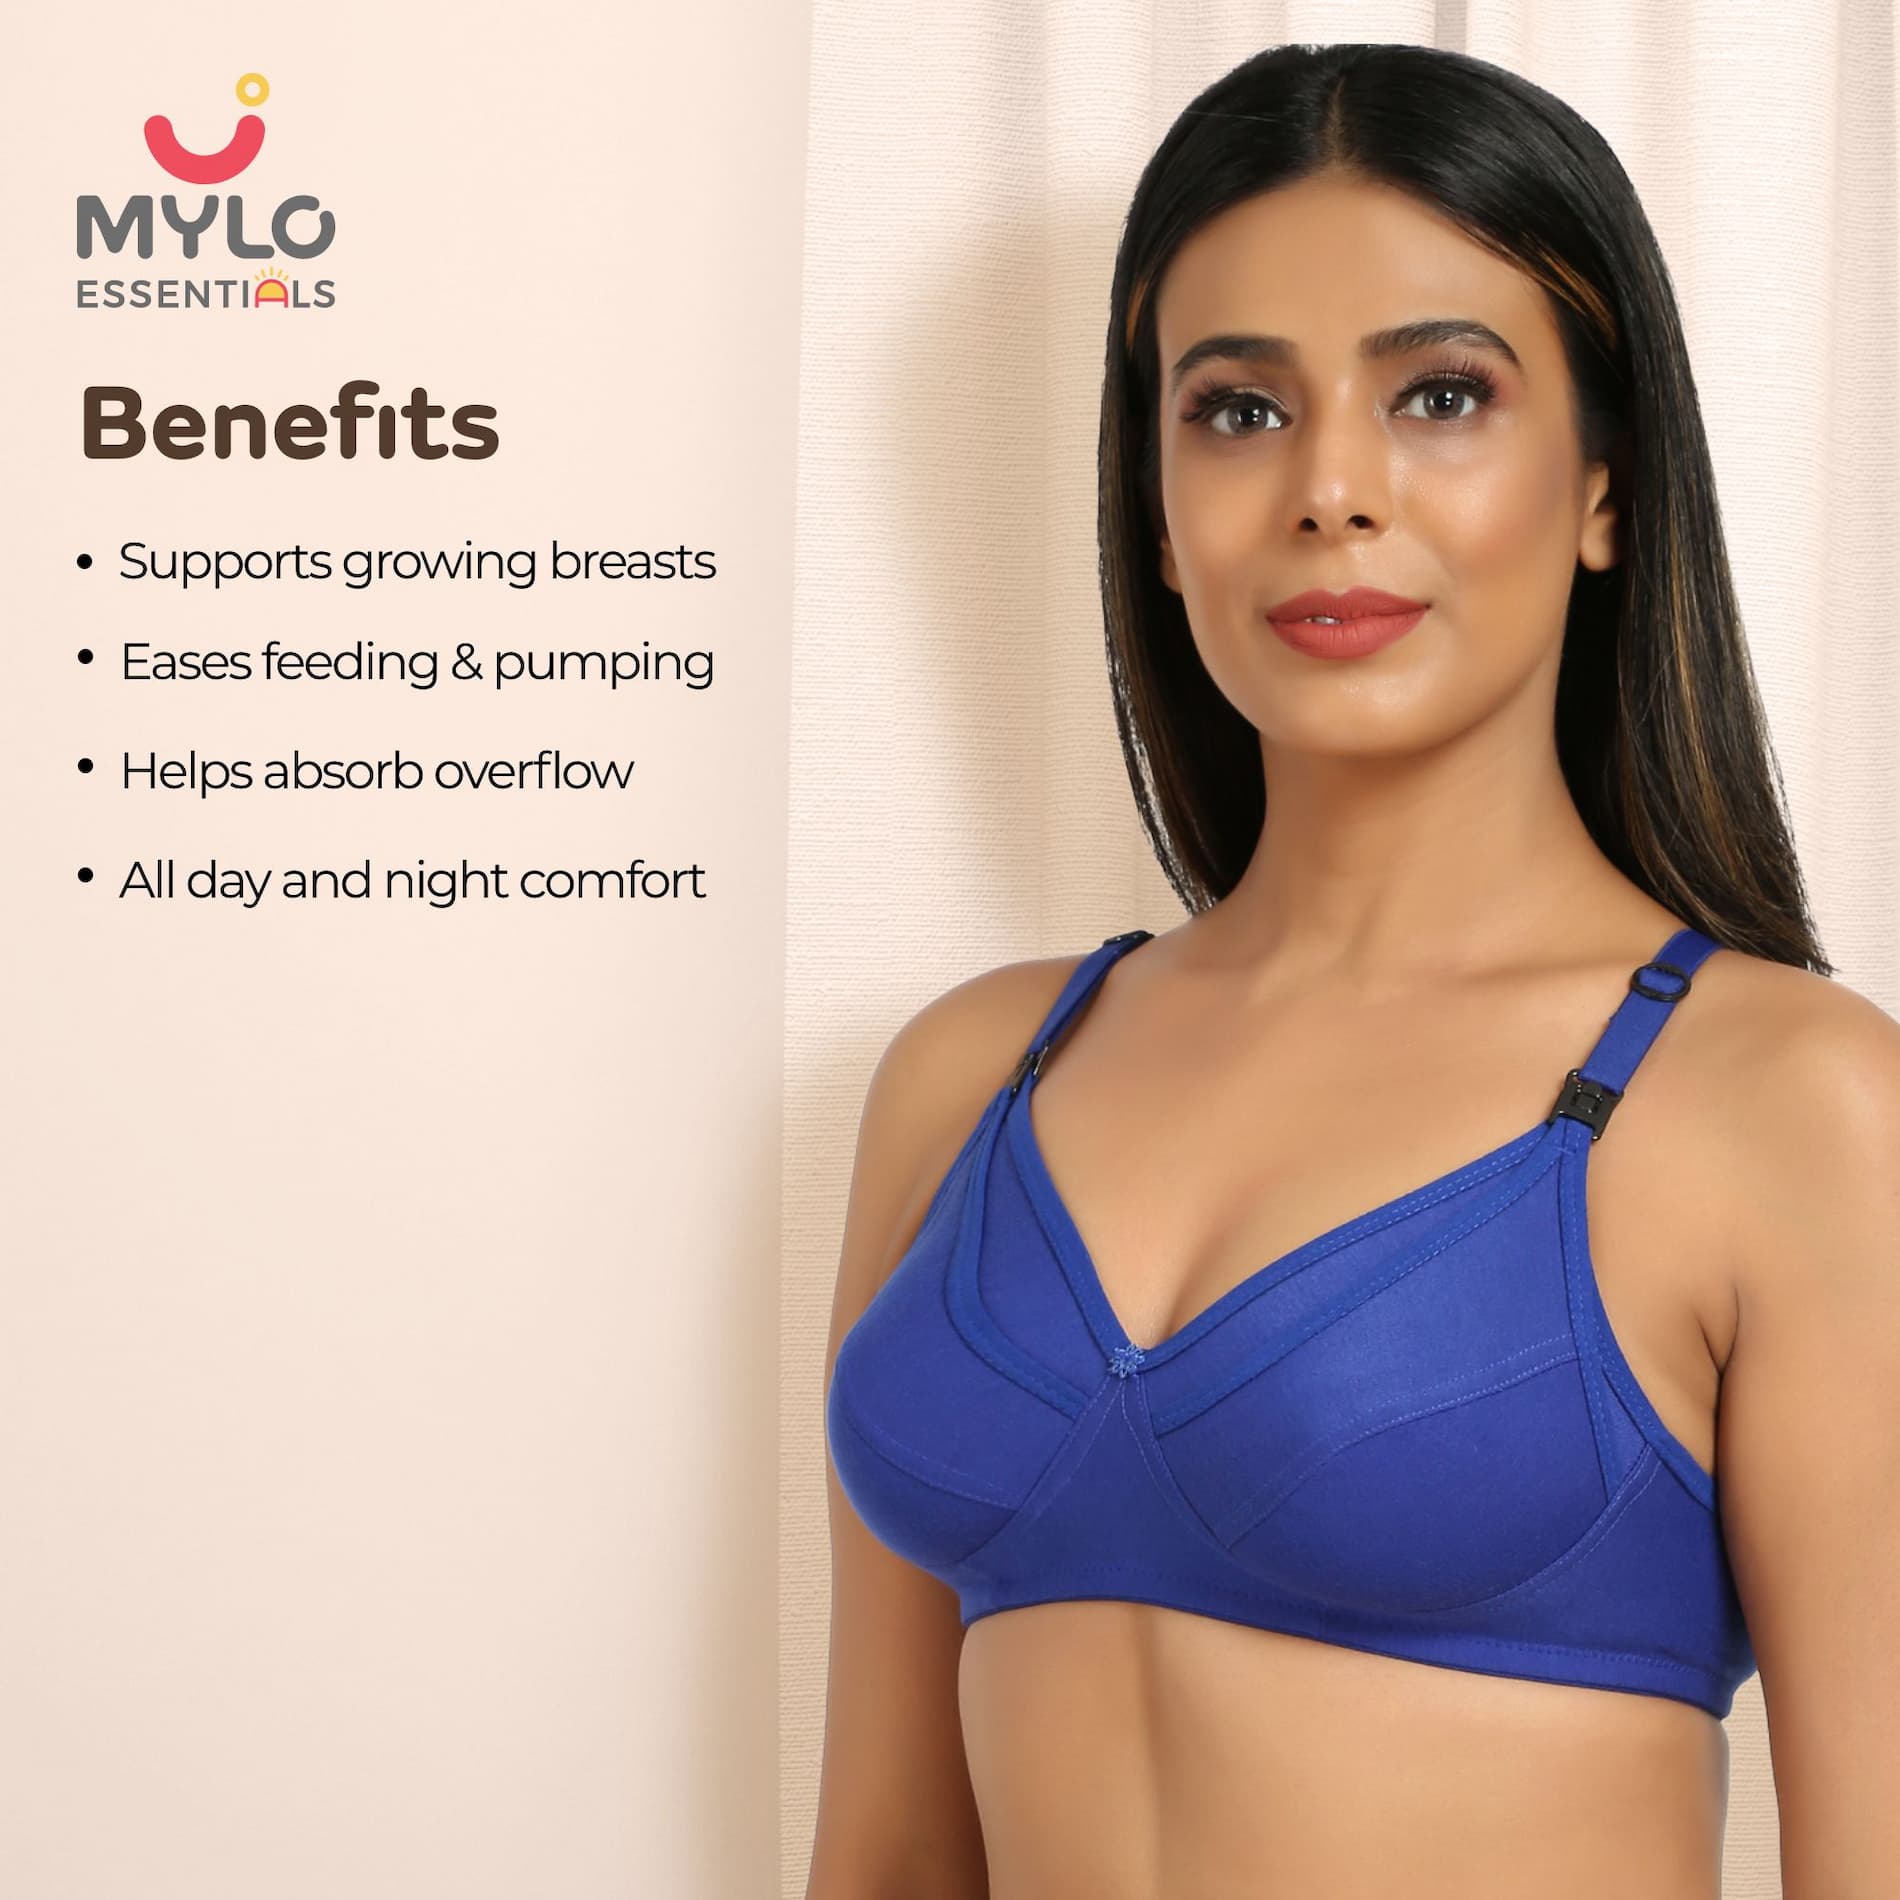 Maternity/Nursing Bras Non-Wired, Non-Padded with free Bra Extender - Persian Blue 38 B 